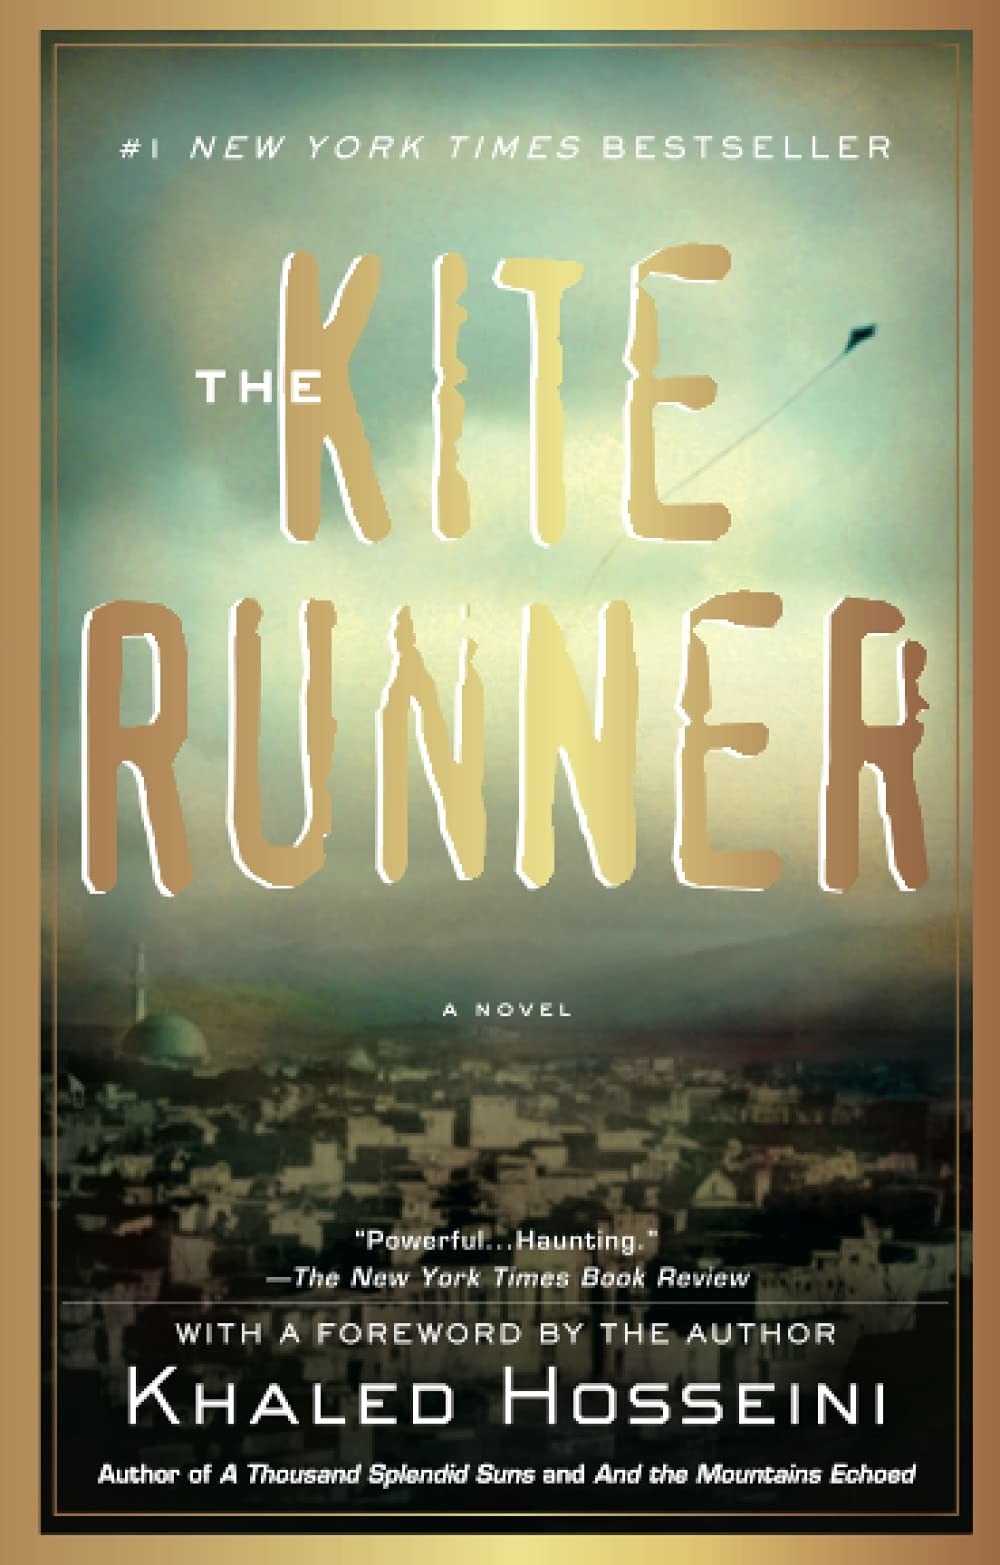 Book cover of &quot;The Kite RUnner&quot;